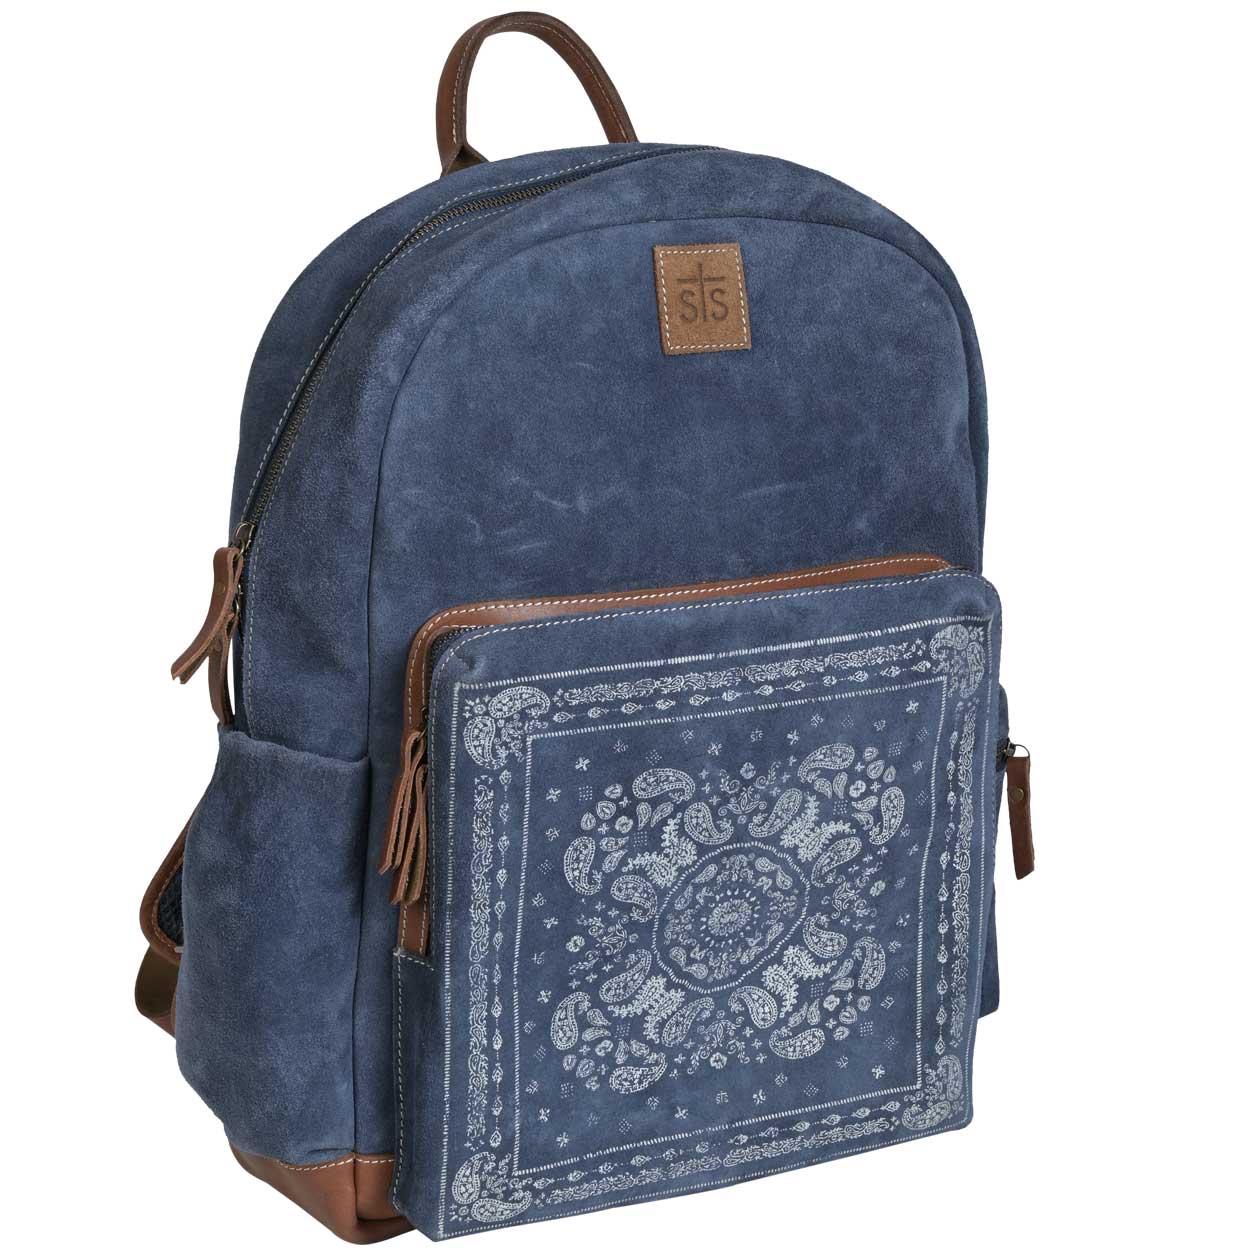 Bandana Backpack by STS